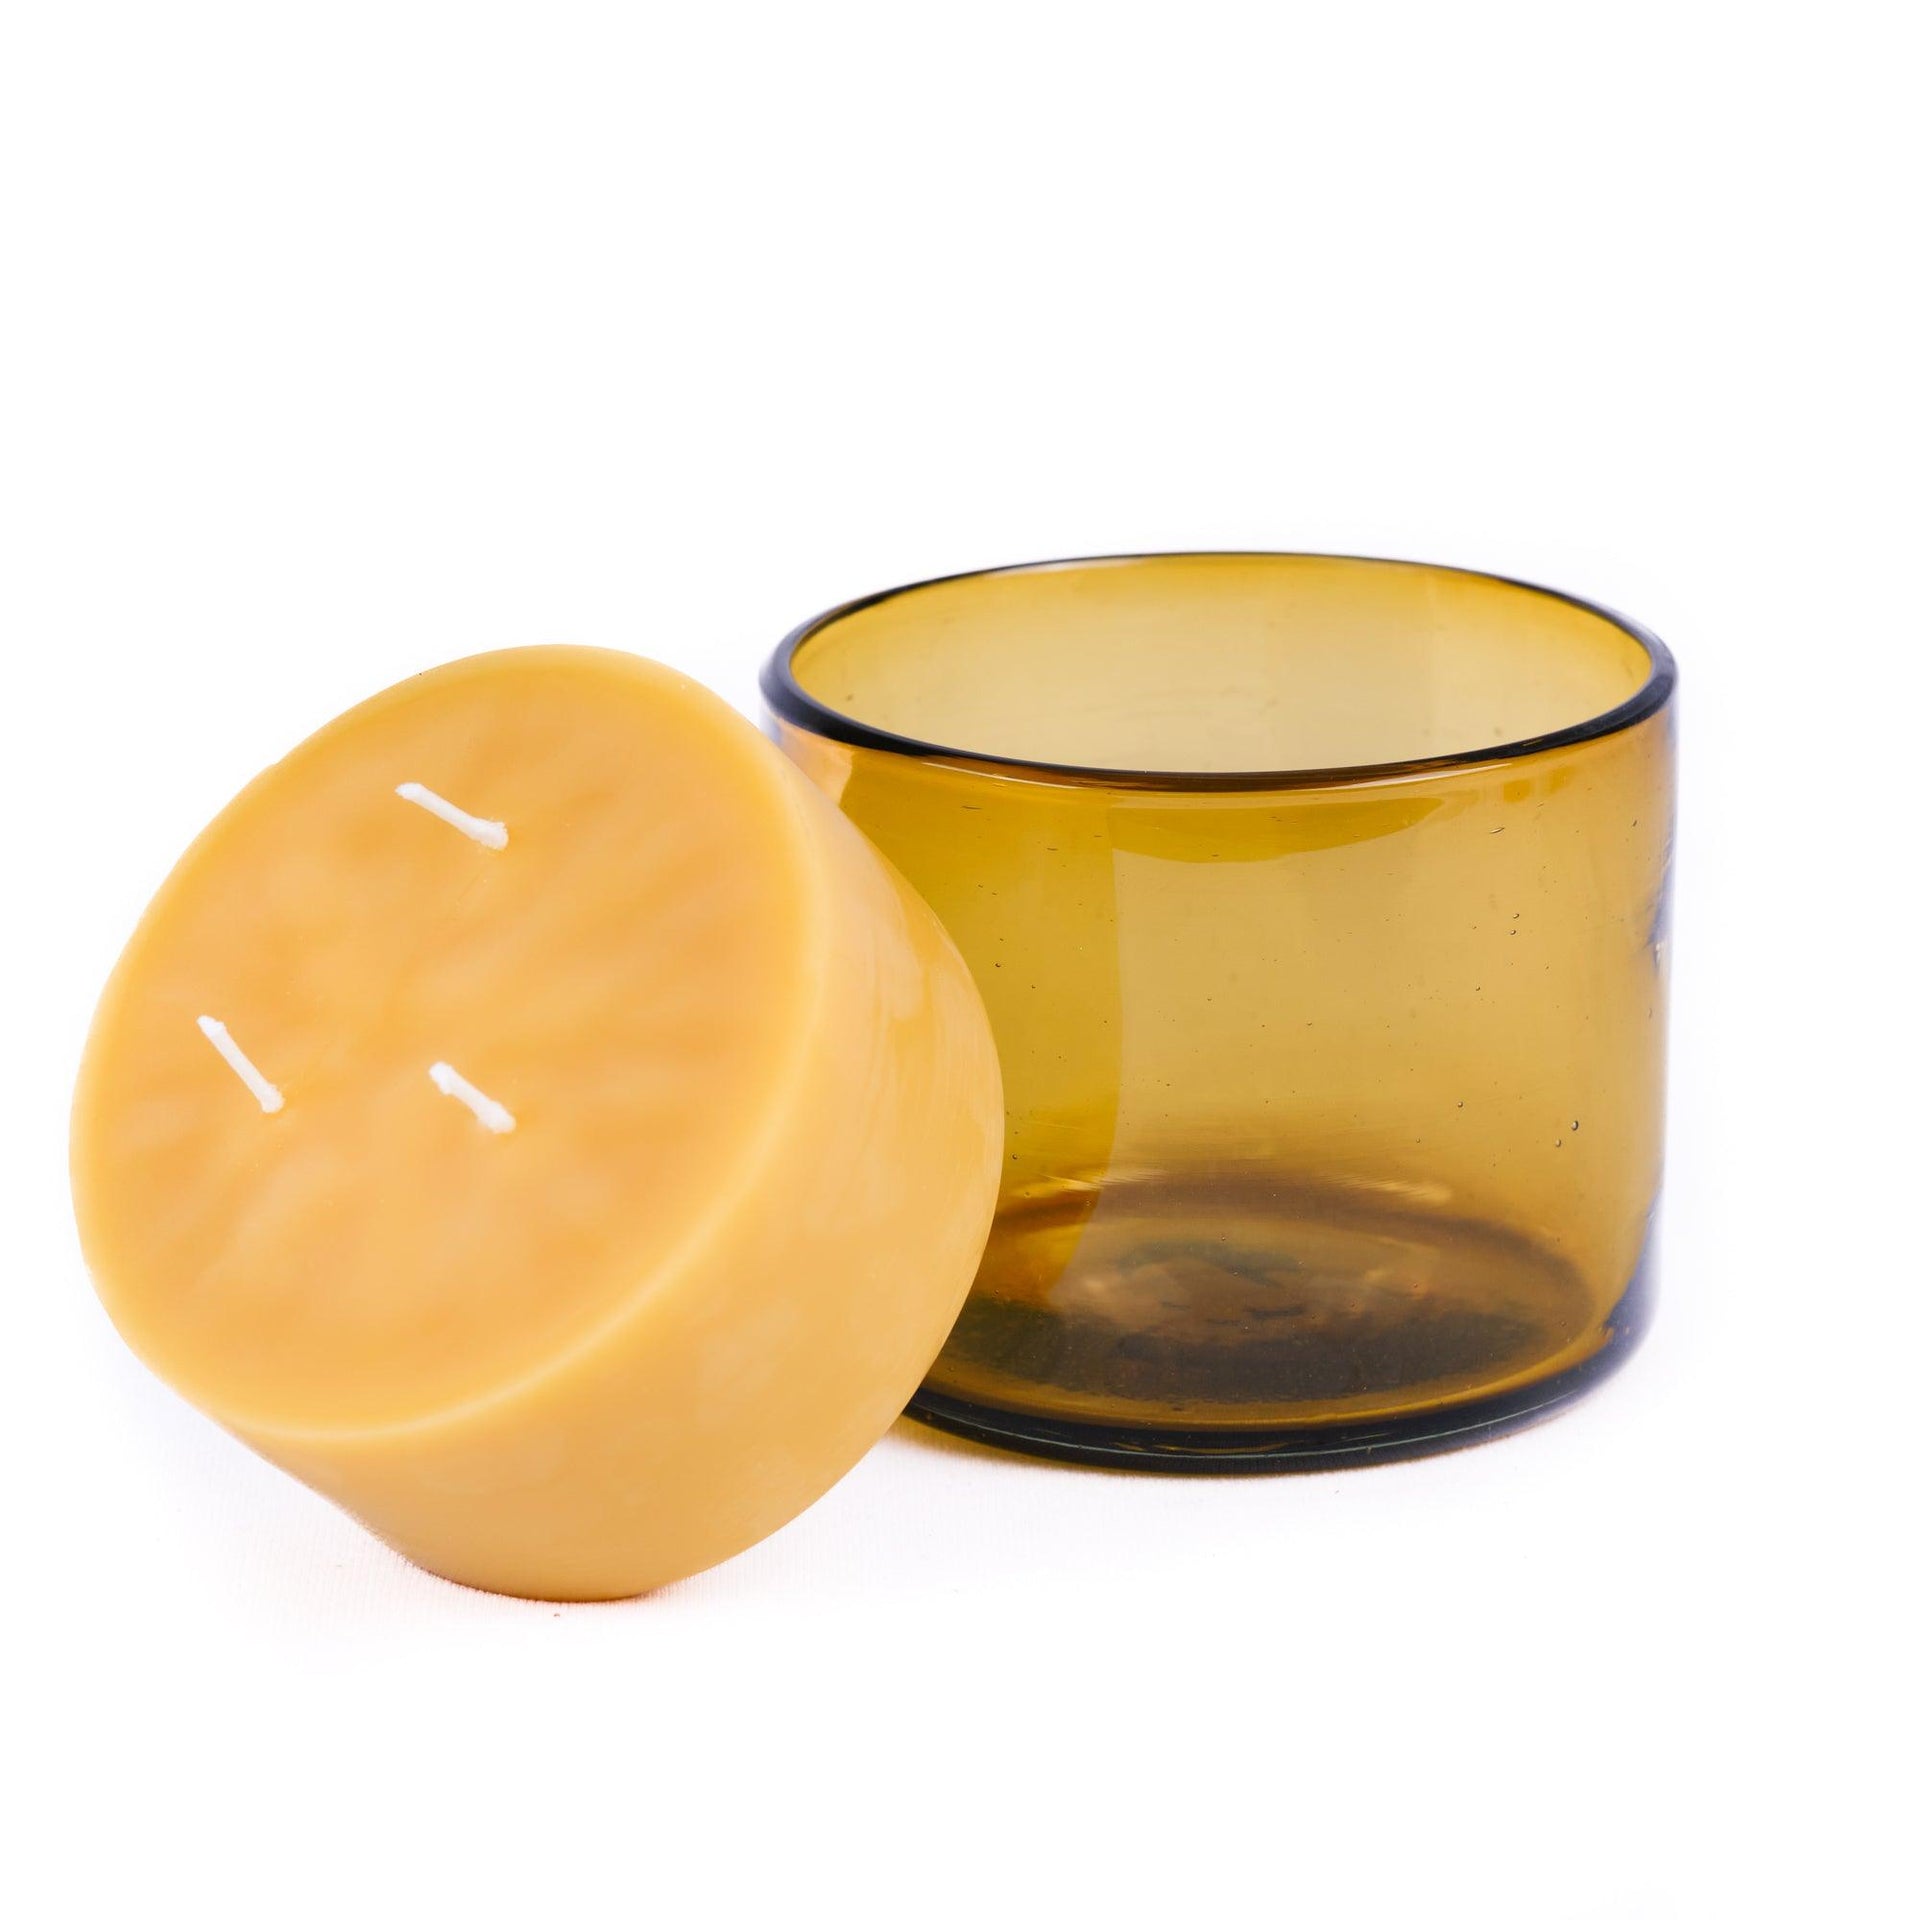 Beeswax Botanica Scented Candle in Blown Glass 22oz 3-Wick / Spruce